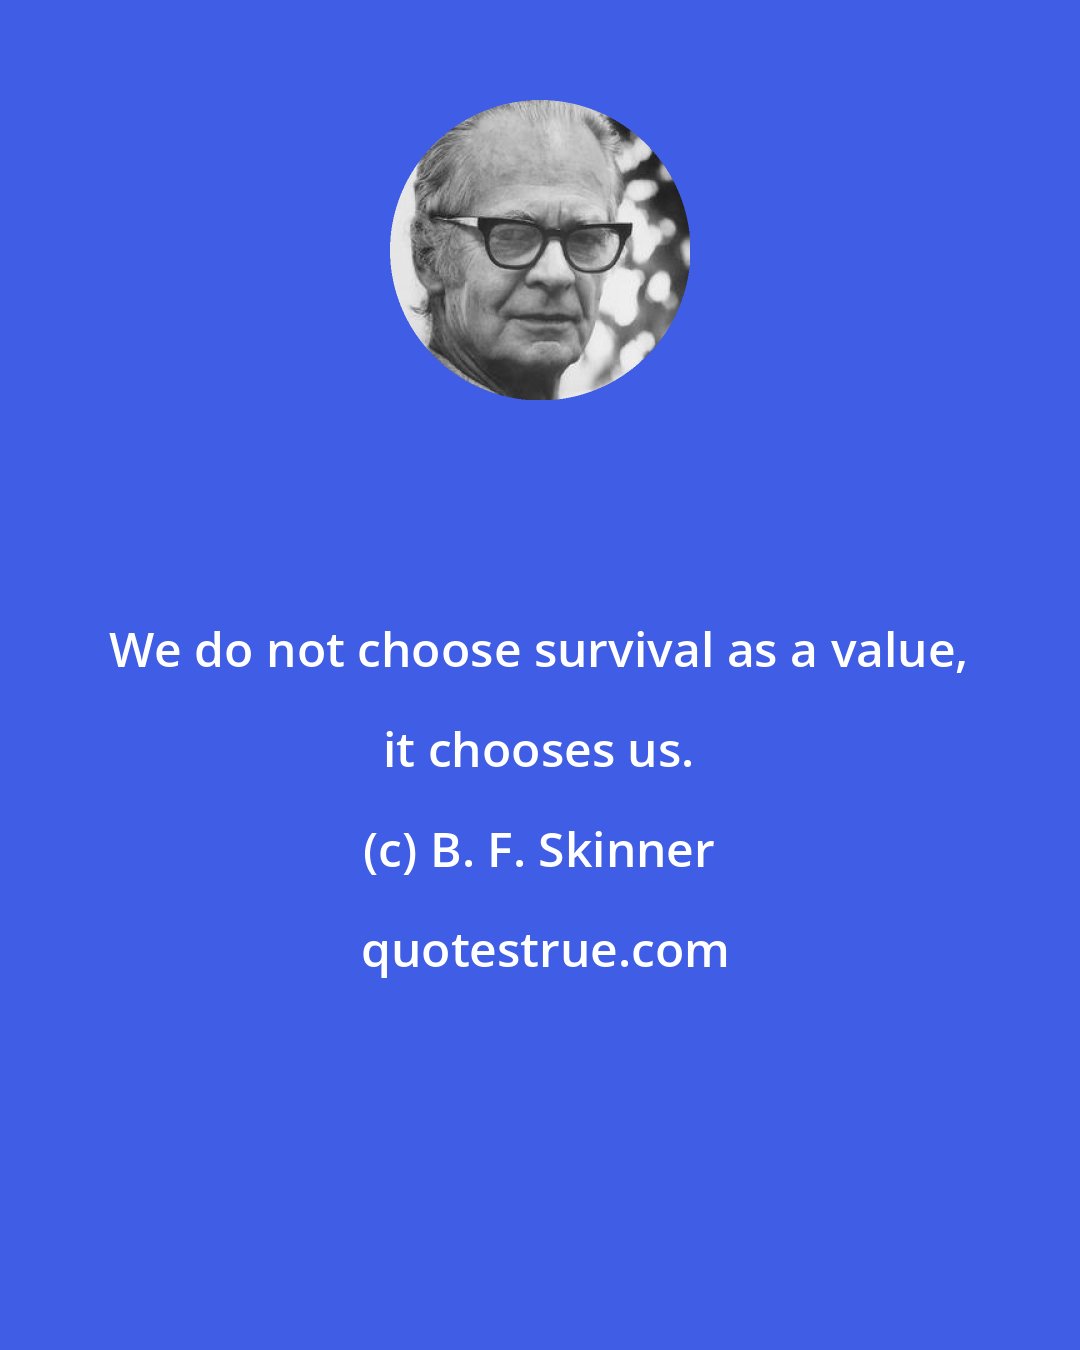 B. F. Skinner: We do not choose survival as a value, it chooses us.